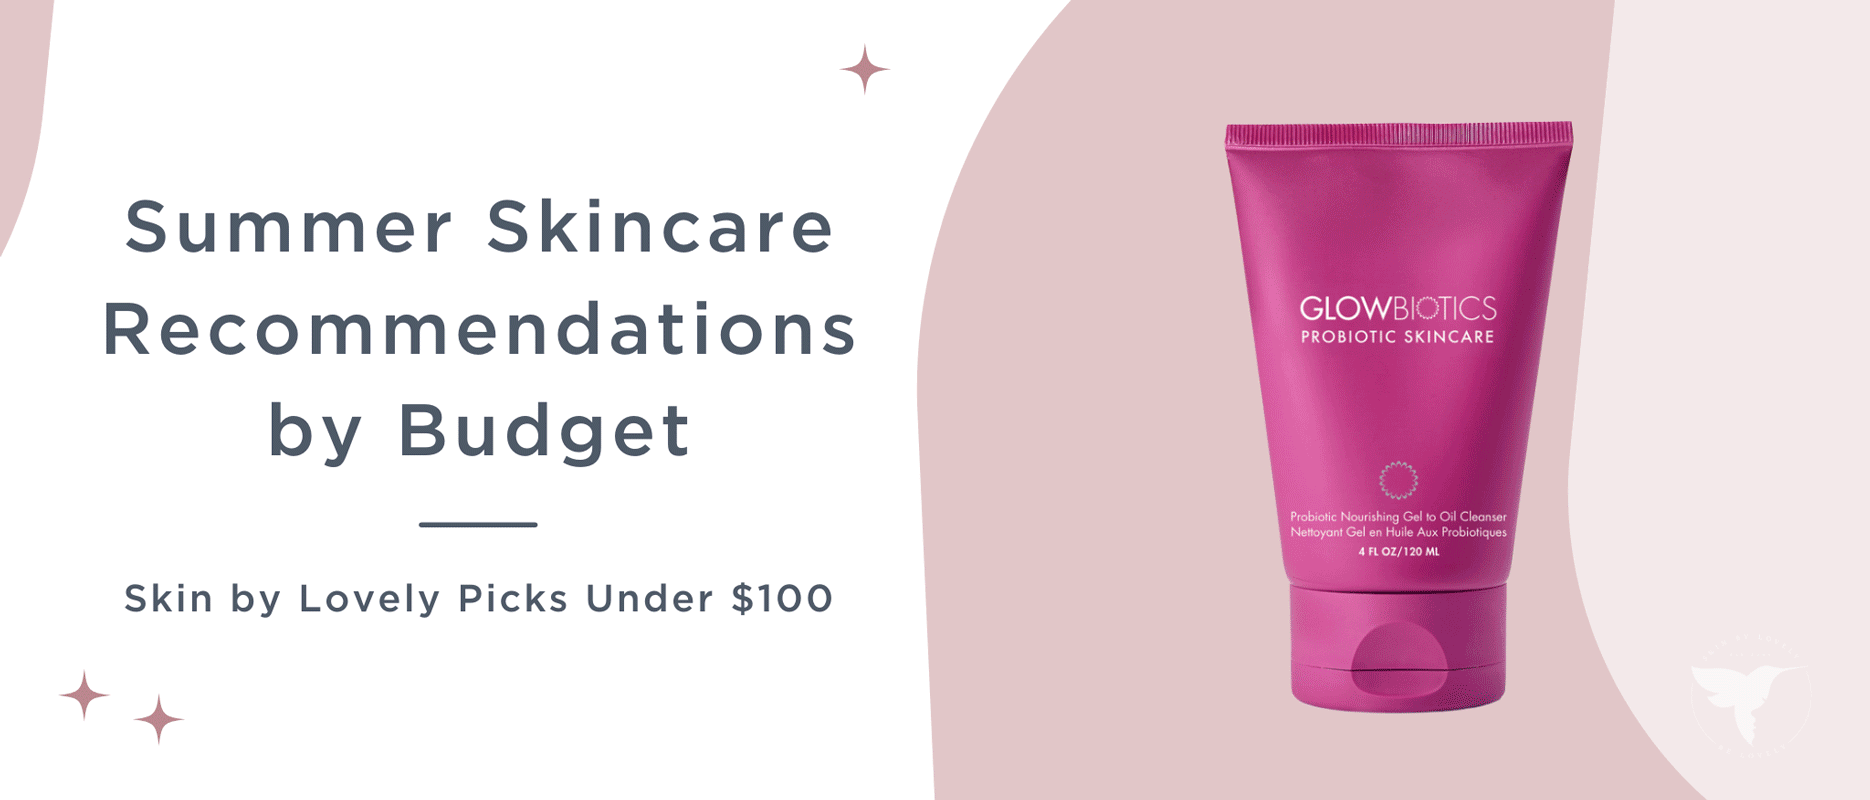 Summer Skincare Recommendations by Budget